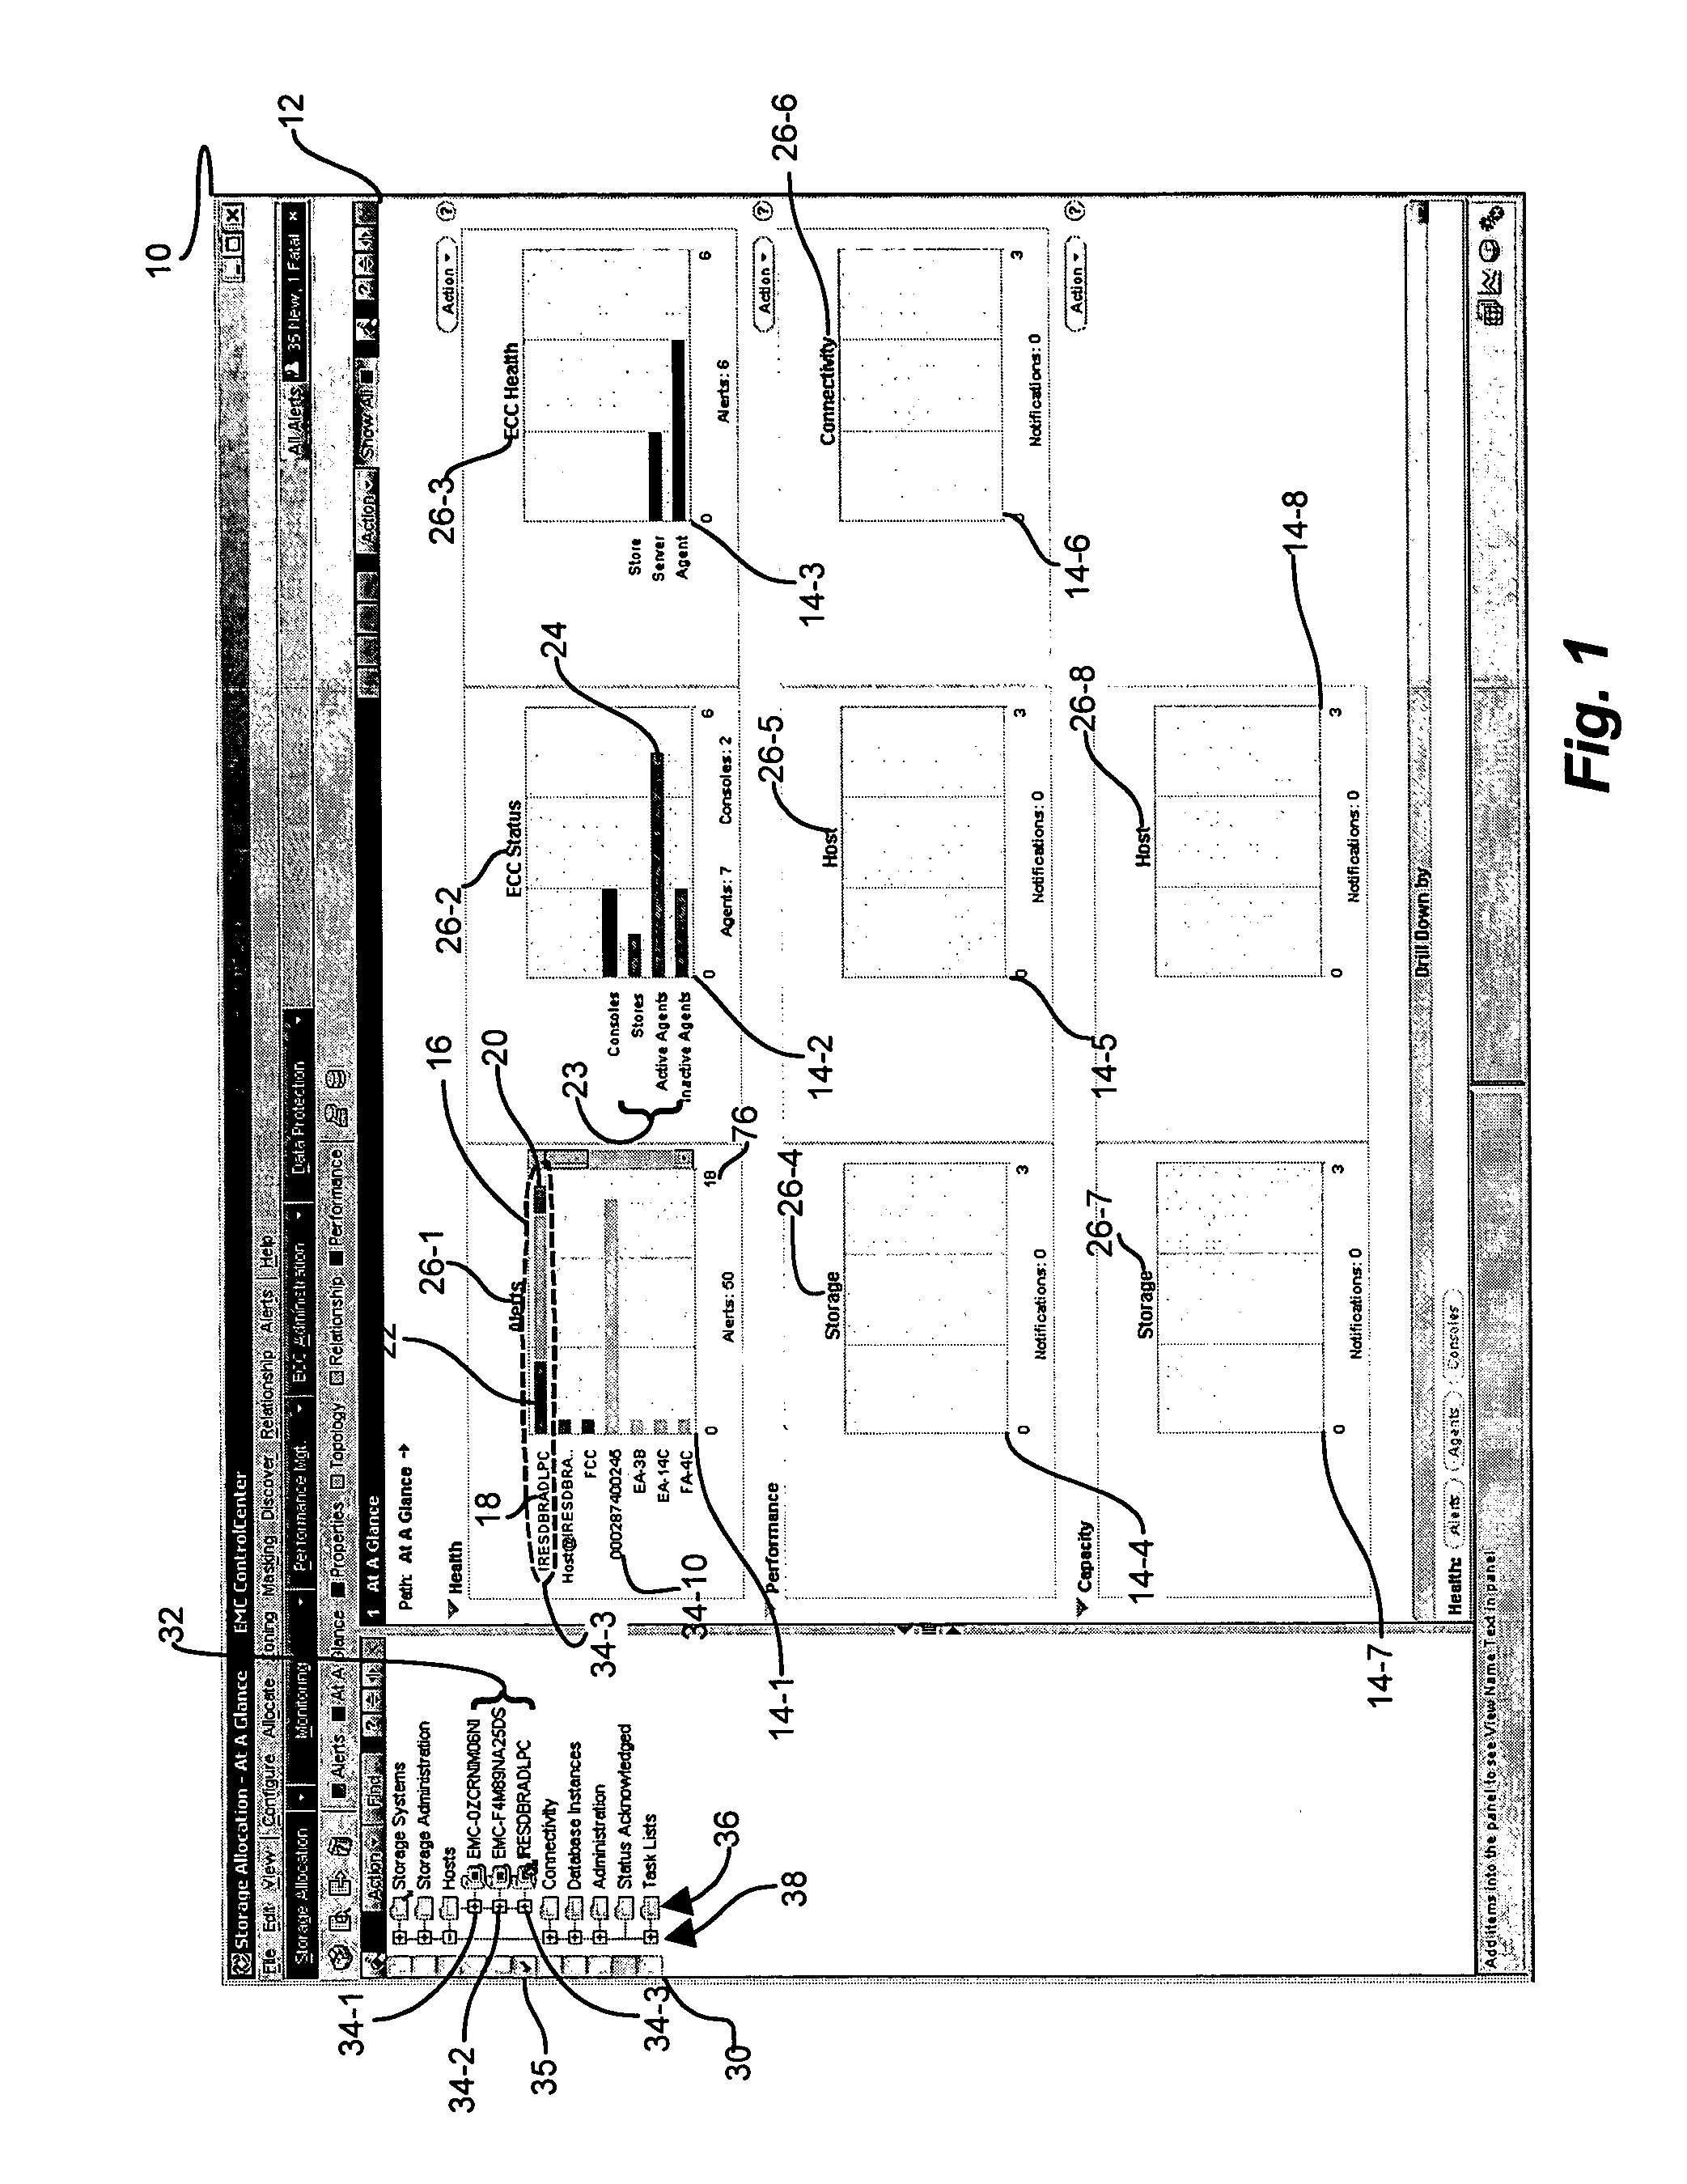 System and methods for processing and displaying aggregate status events for remote nodes